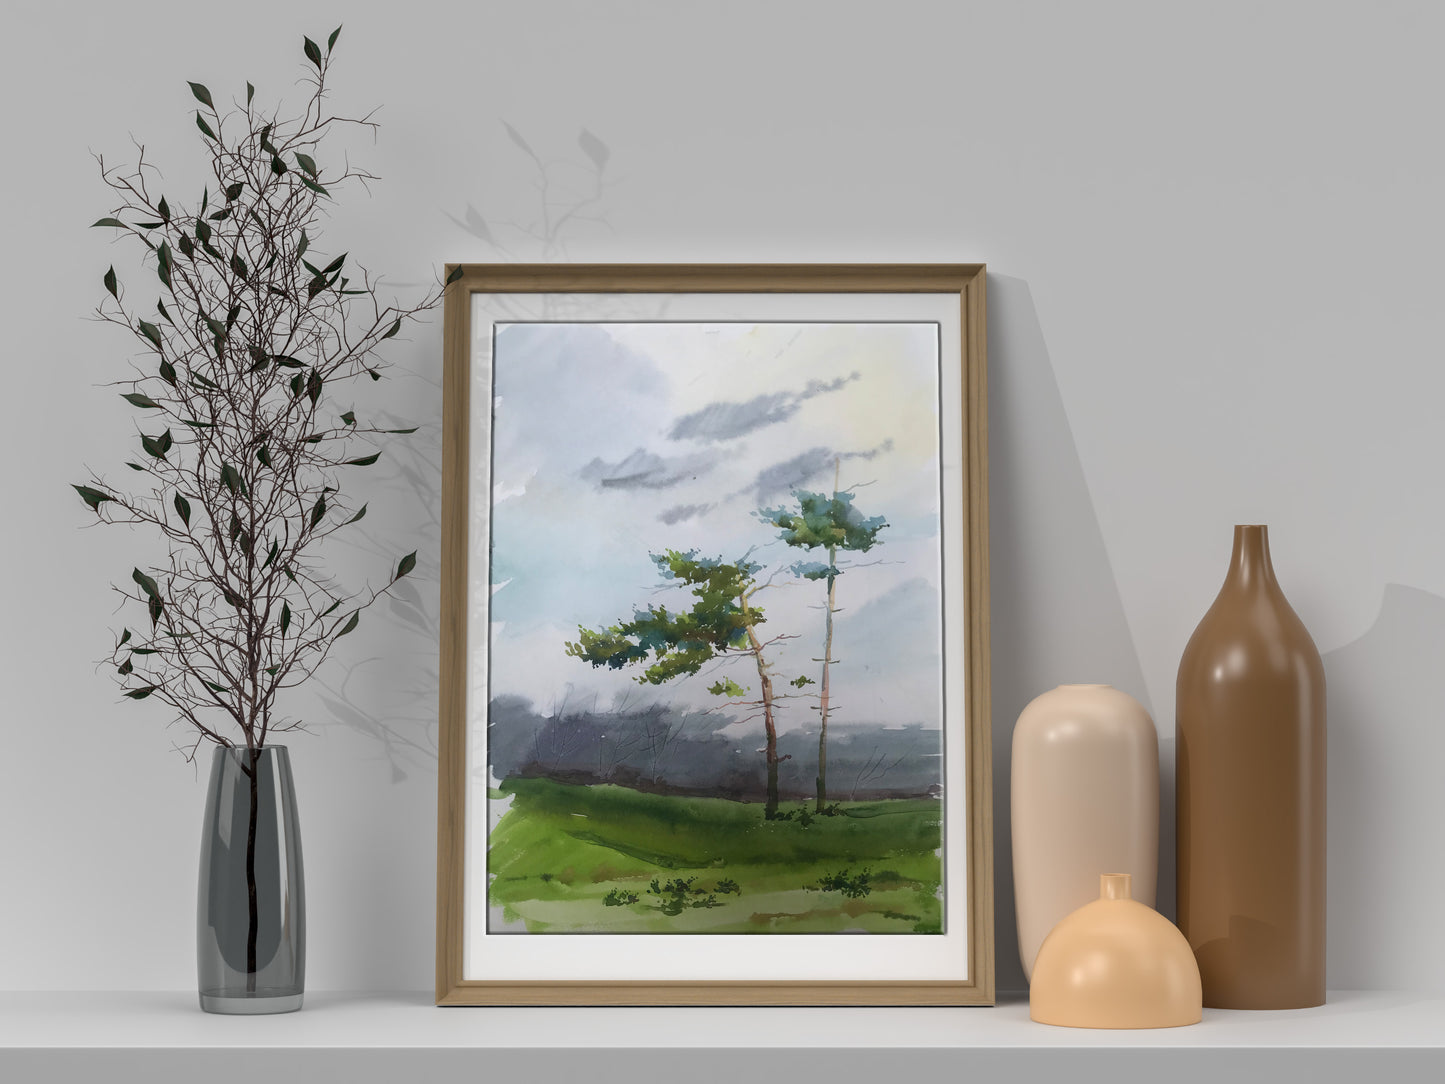 Watercolor painting Two lonely trees in a field Unknown artist